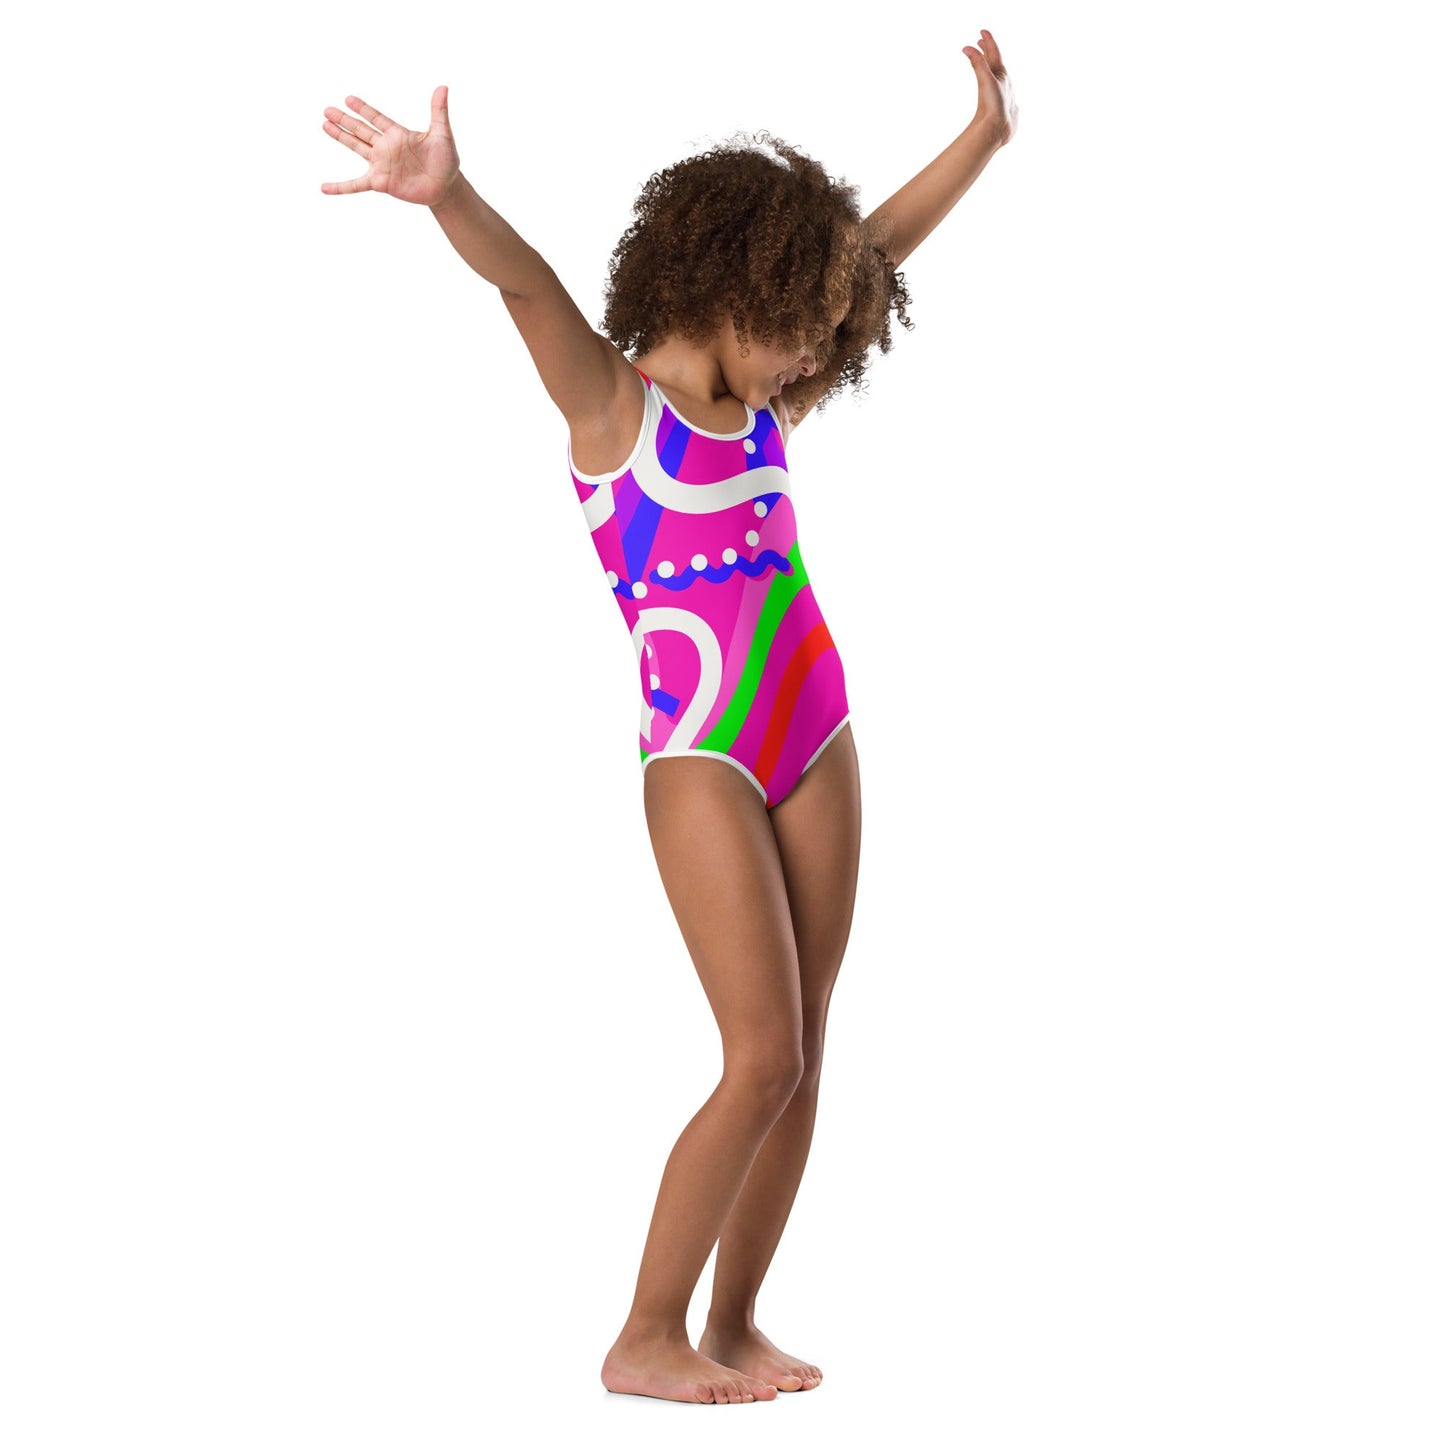 Plastic Doll Rollerblading Kids Swimsuit- Cosplay, Costume 80s costume80s stylebarbie doll#tag4##tag5##tag6#